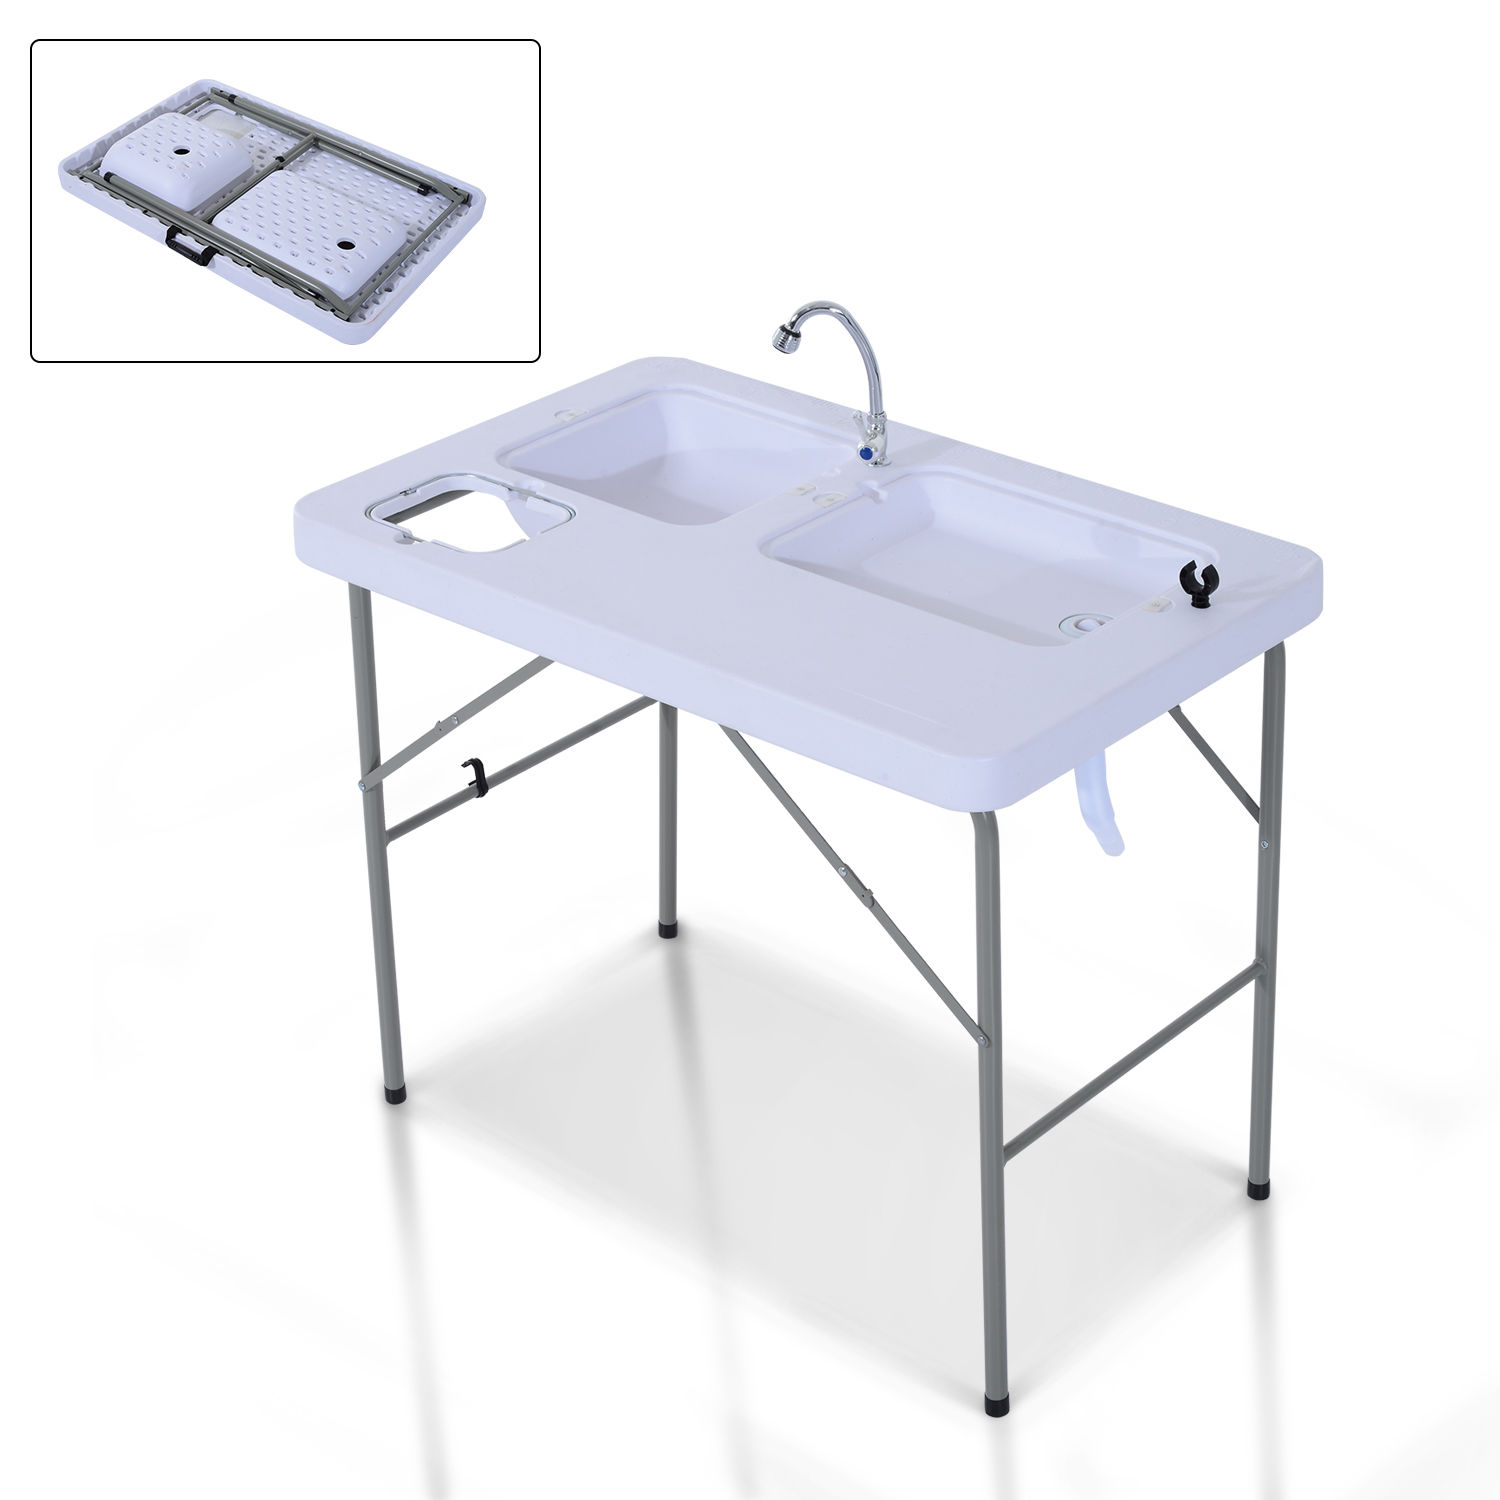 Outsunny Portable Camping Table 40 with Faucet Folding Sink 2 Water Basins Parties   Aosom.com